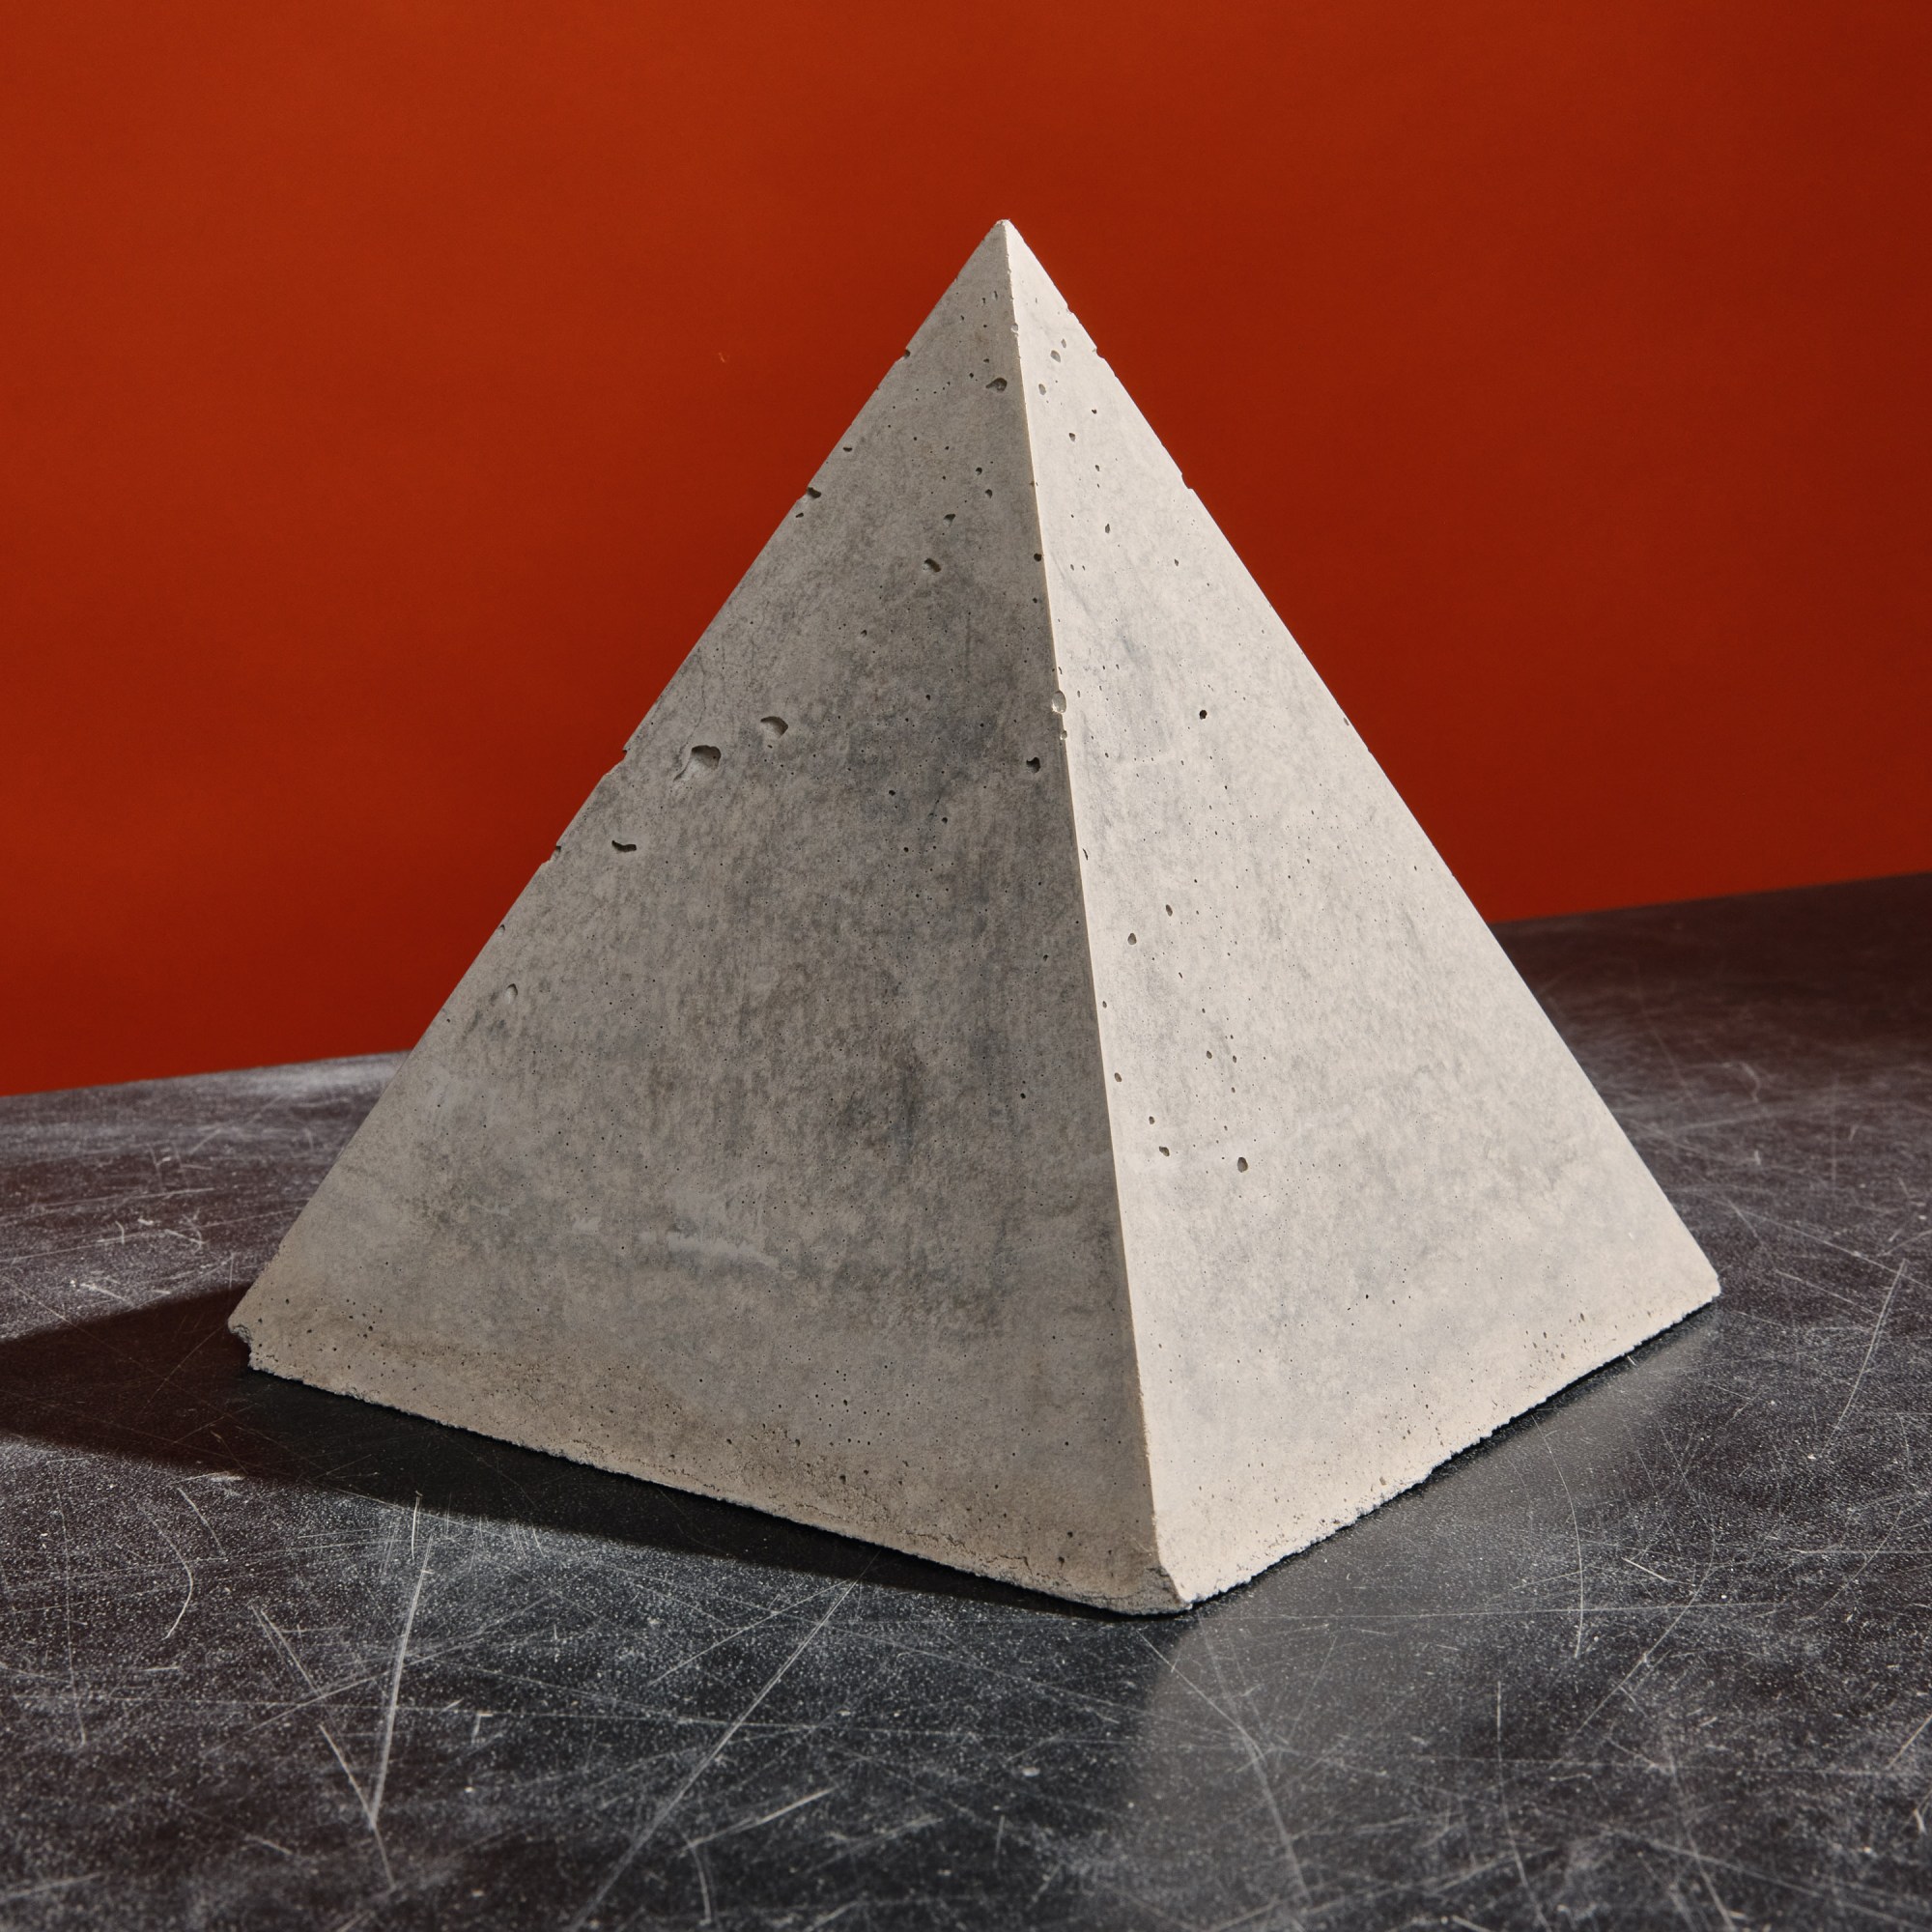 Cured cement in a pyramid shape